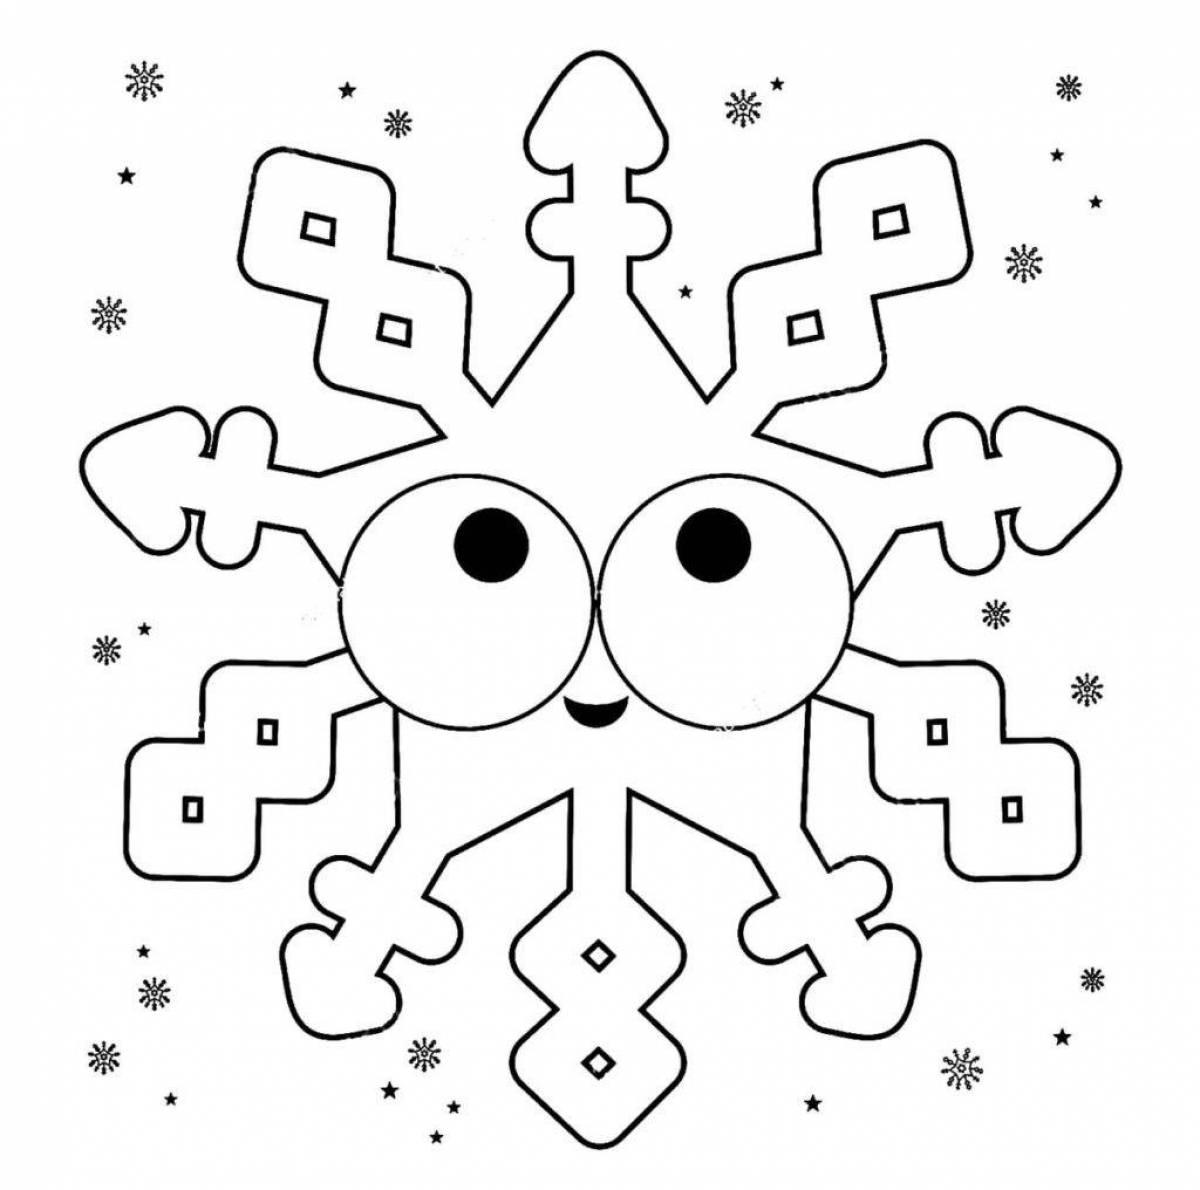 An entertaining snowflake coloring book for children 5-6 years old